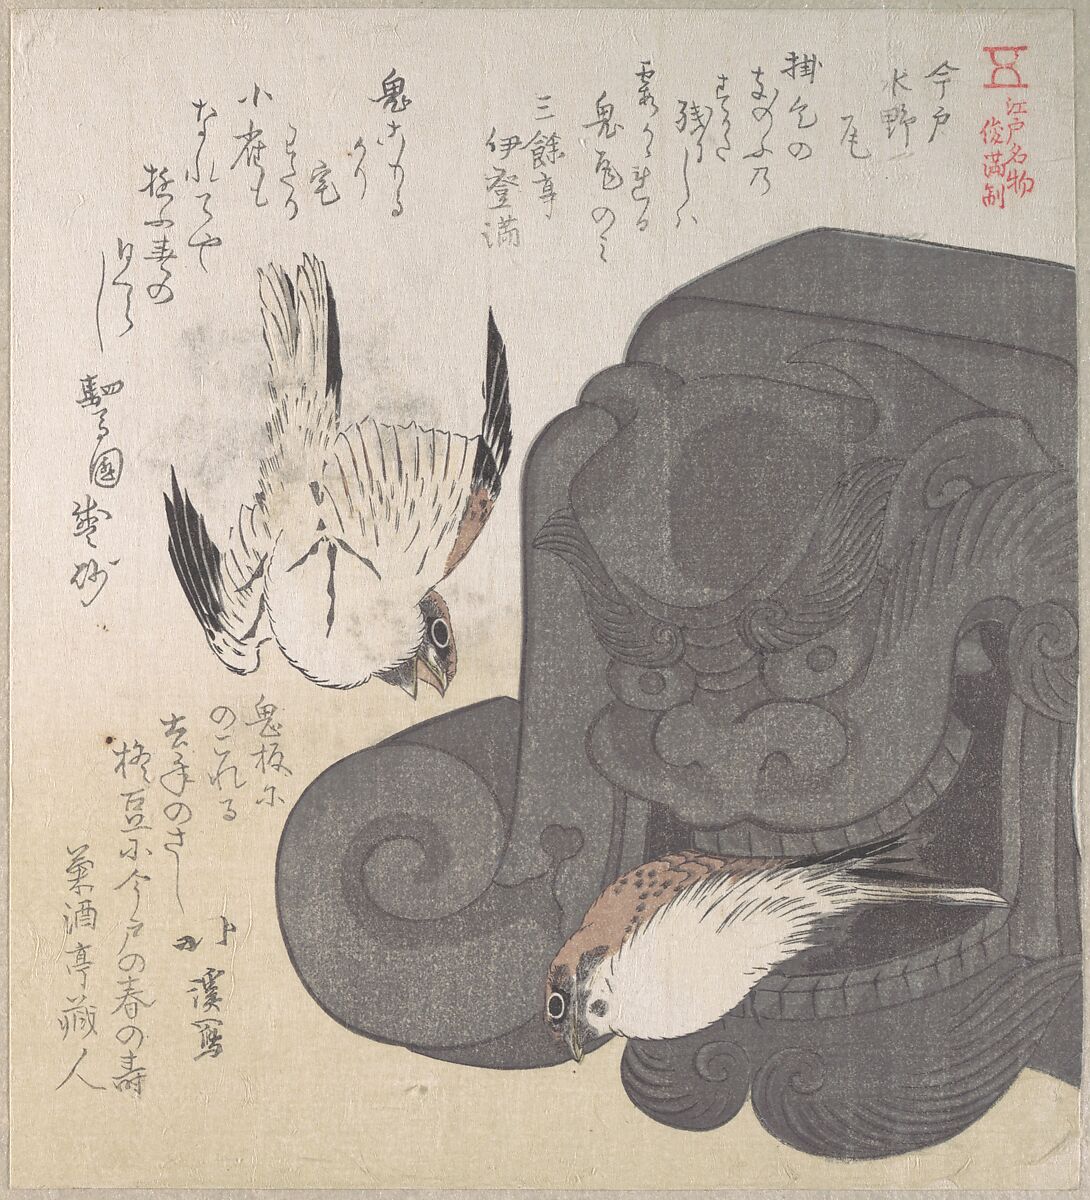 Roof Tile and Sparrows; Specialities of Mizuno in Imado, Totoya Hokkei (Japanese, 1780–1850), Part of an album of woodblock prints (surimono); ink and color on paper, Japan 